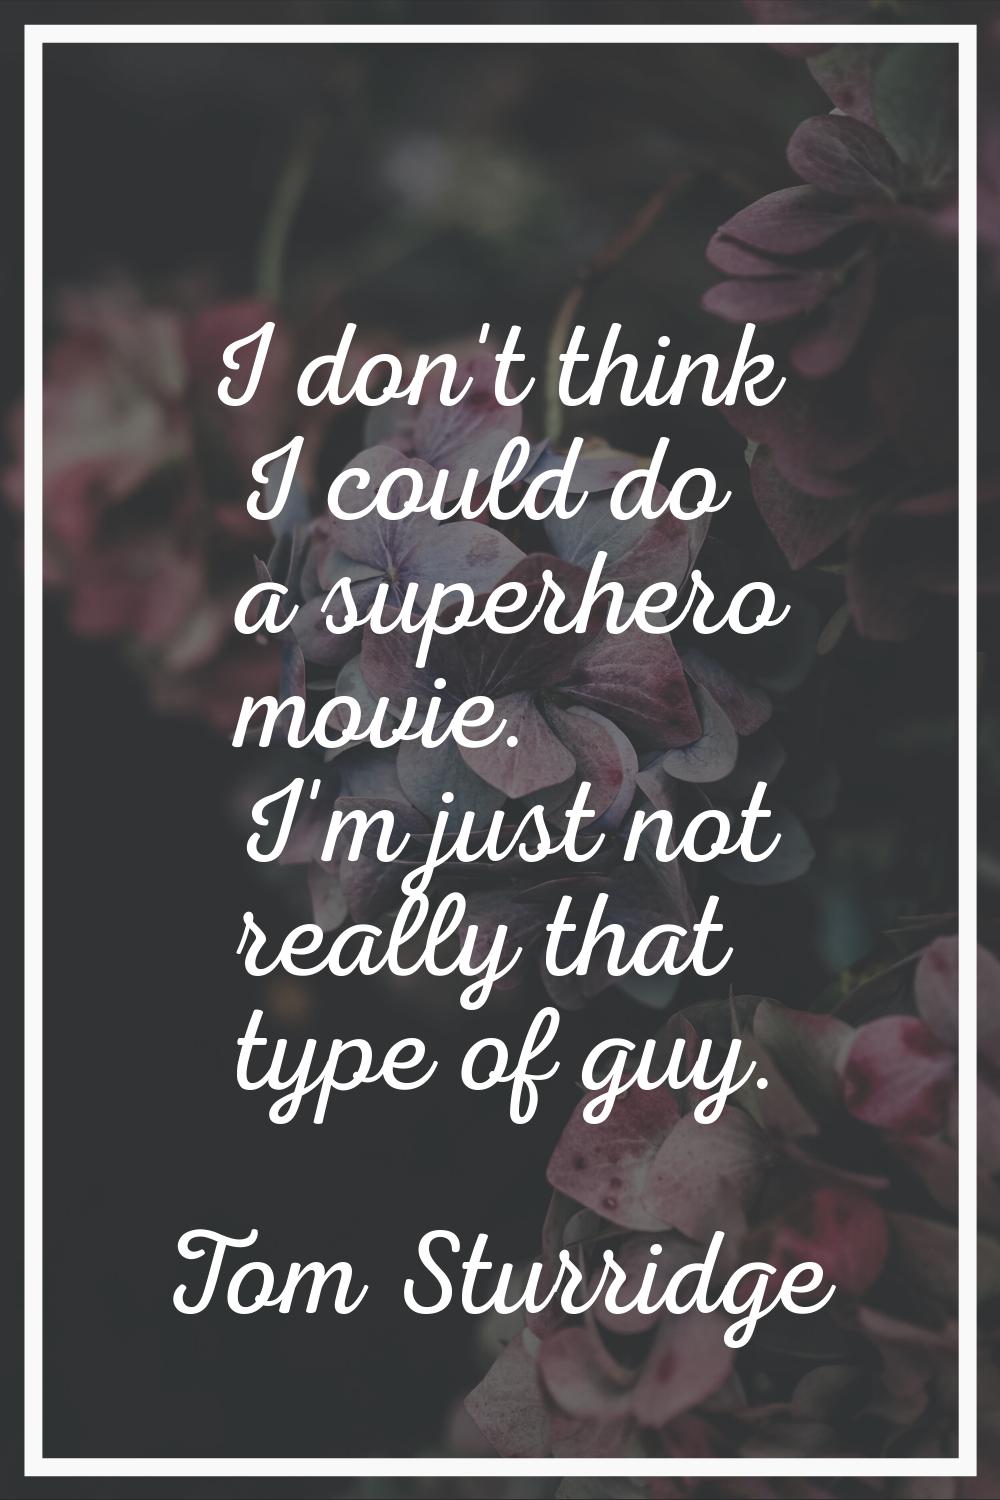 I don't think I could do a superhero movie. I'm just not really that type of guy.